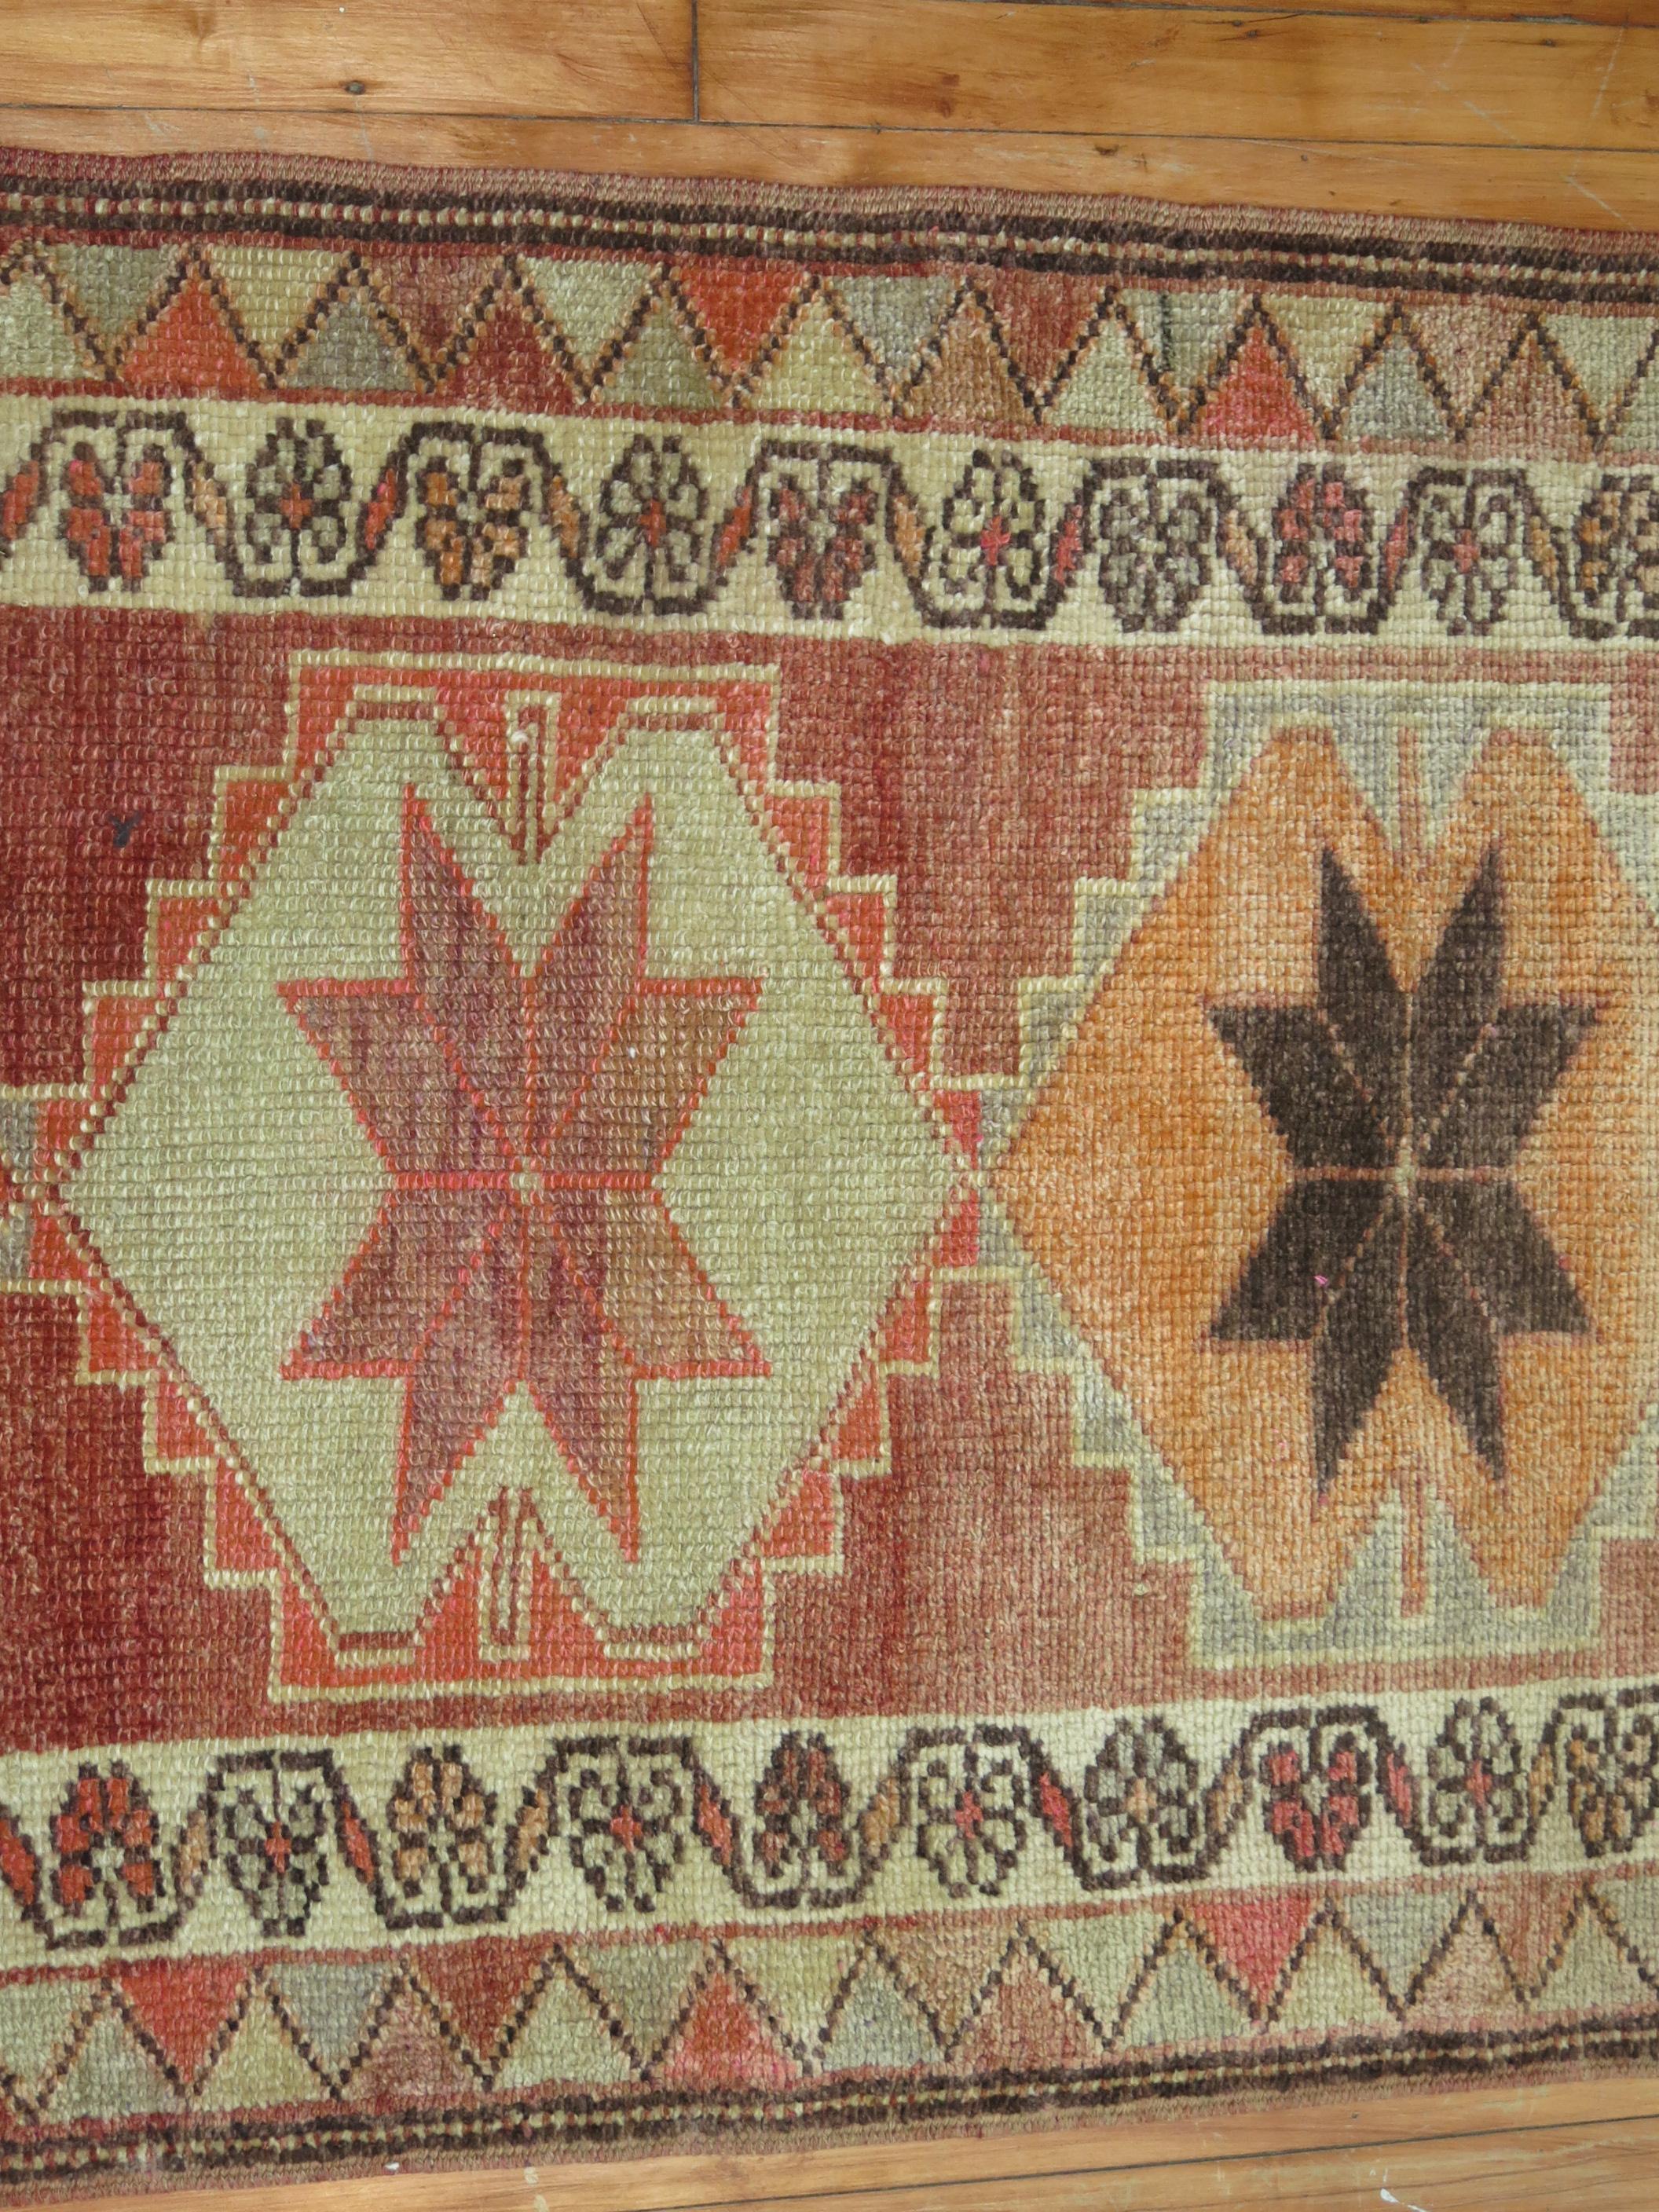 A mid-20th-century Turkish geometric runner in earth tones

Measures: 2'10